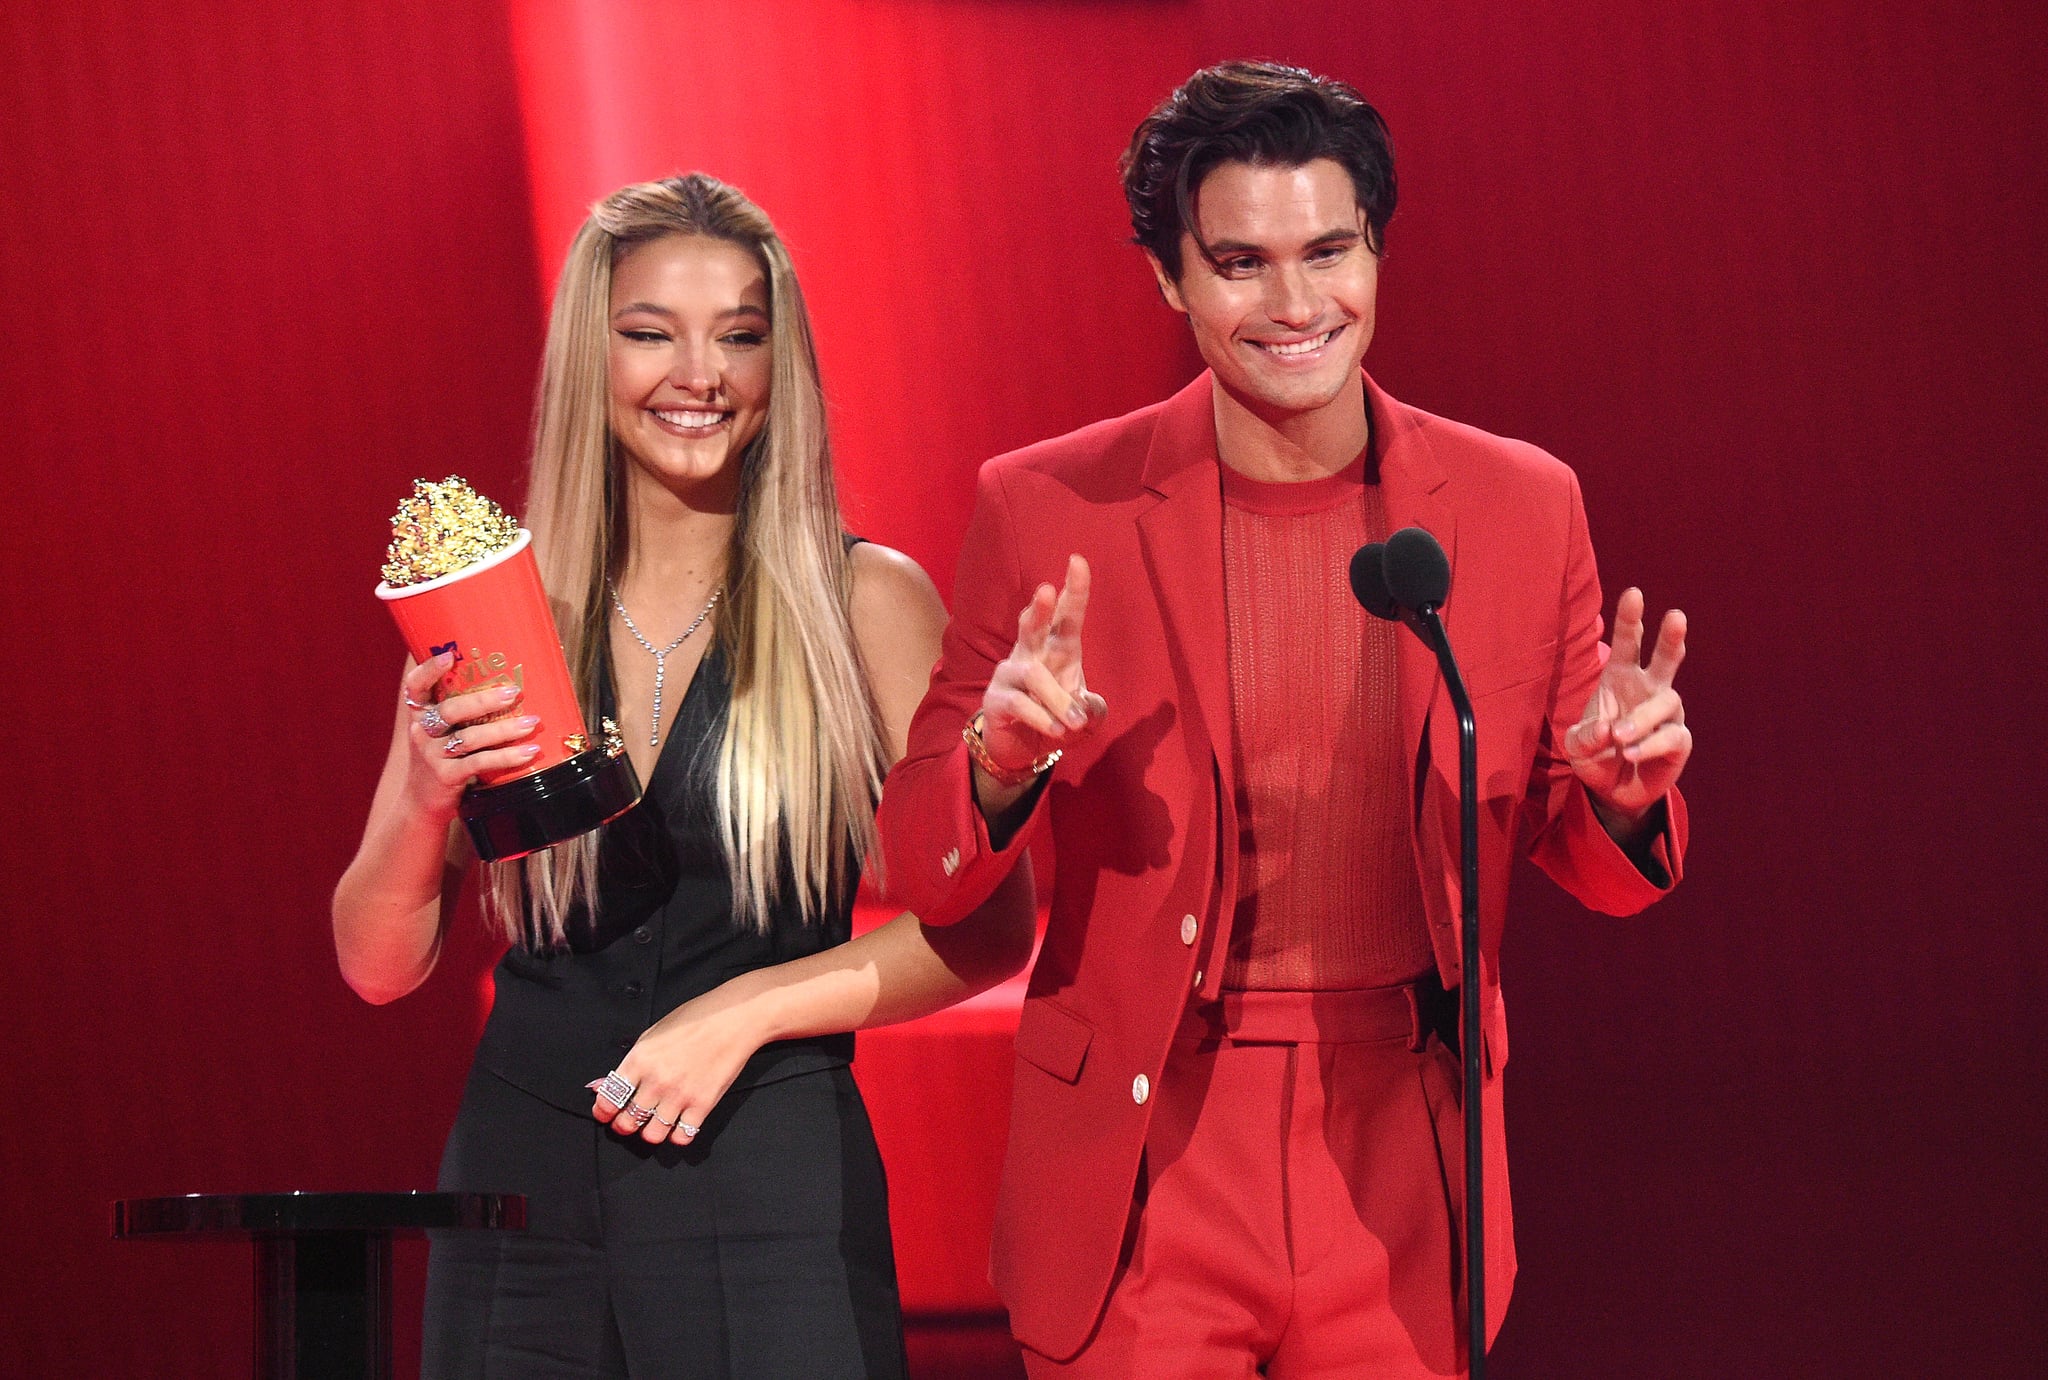 Madelyn Cline and Chase Stokes accept the Best Kiss award for 'Outer Banks' onstage during the 2021 MTV Movie & TV Awards at the Hollywood Palladium on May 16, 2021 in Los Angeles, California.